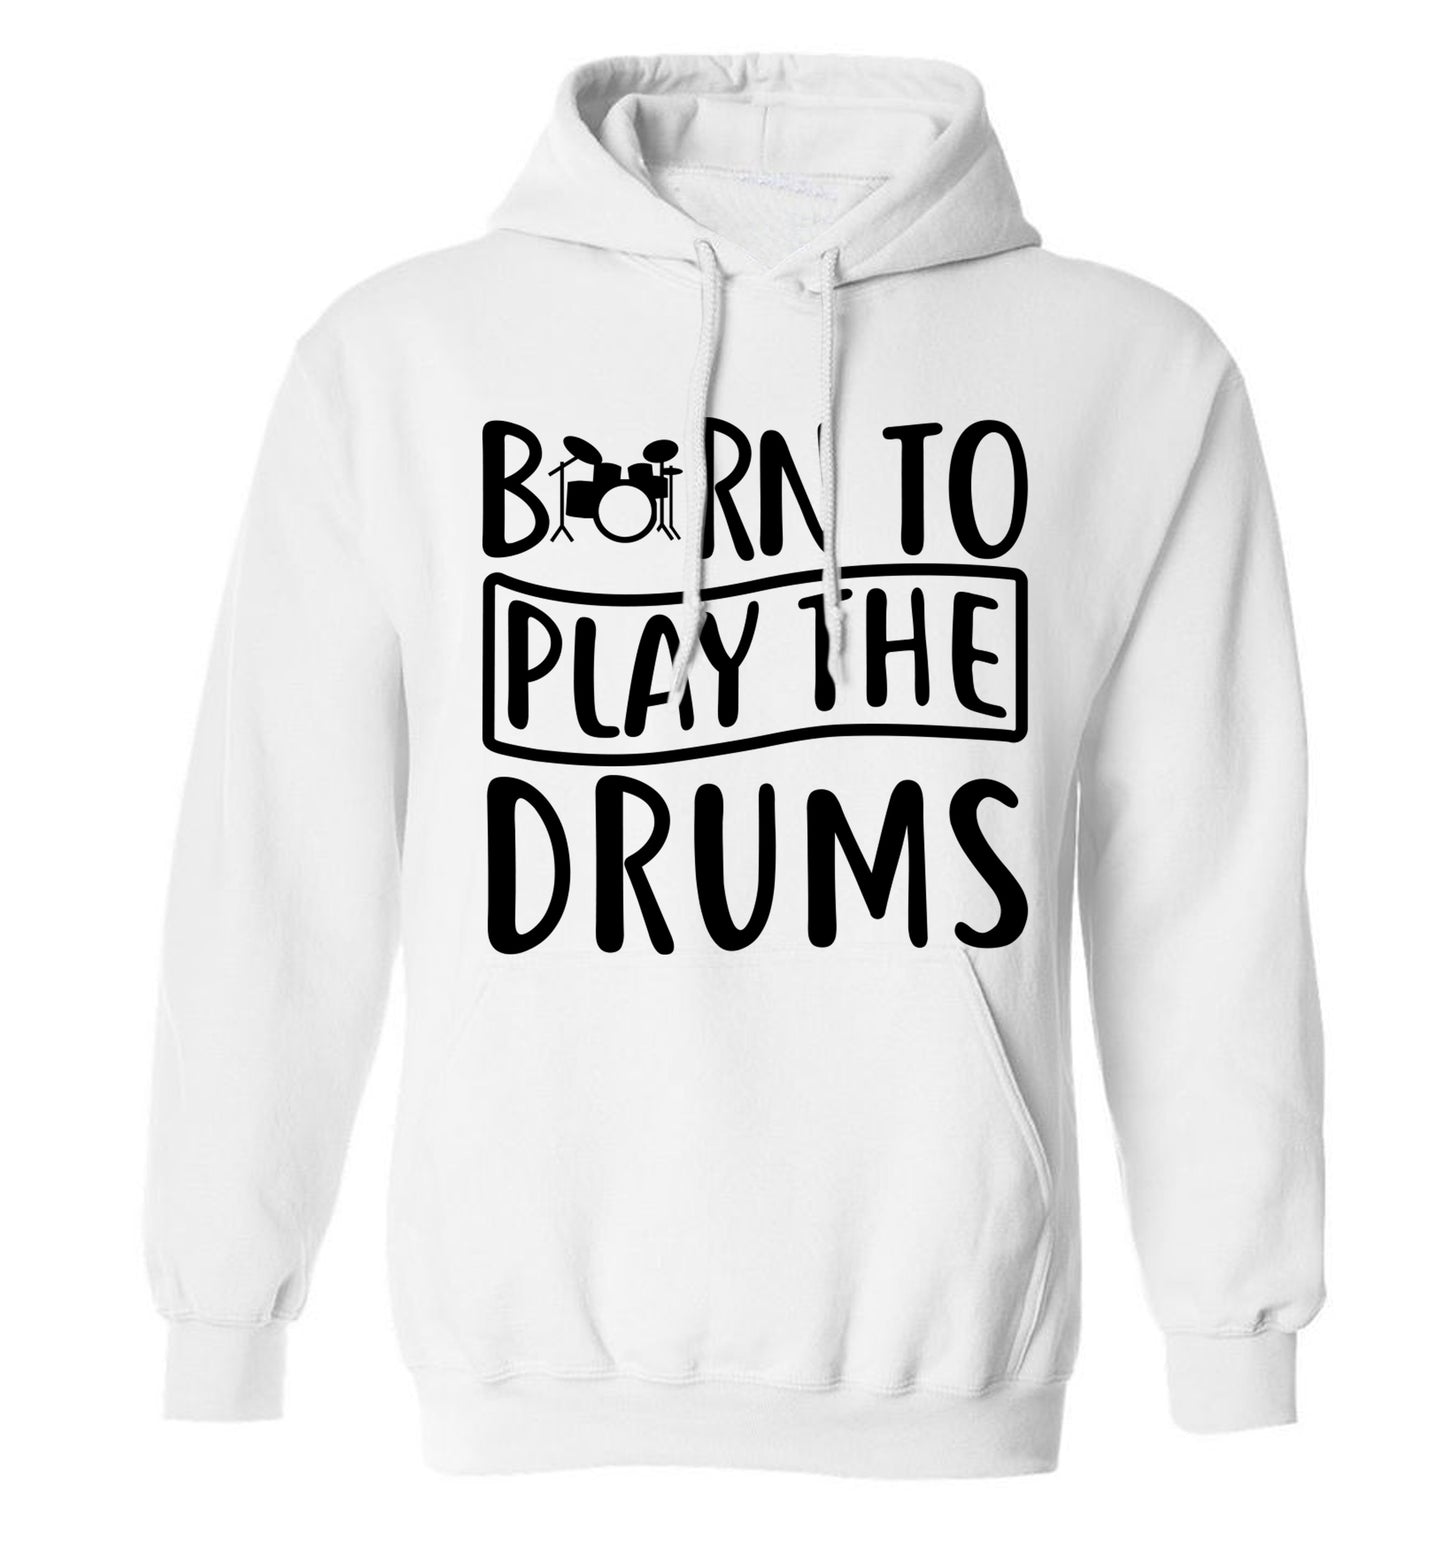 Born to play the drums adults unisex white hoodie 2XL